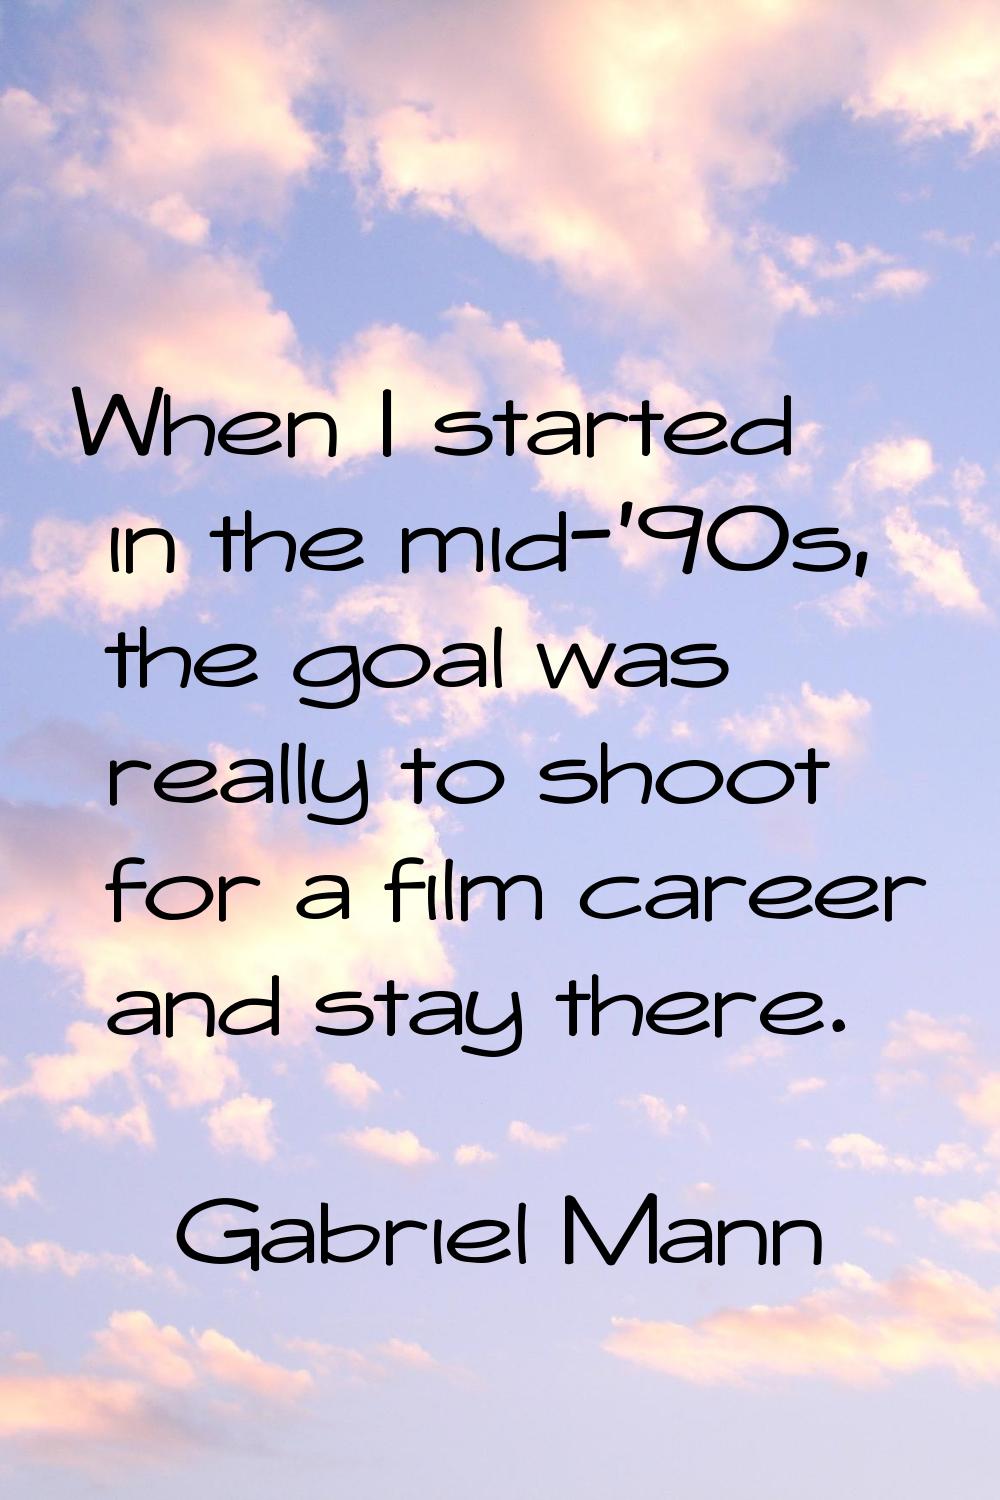 When I started in the mid-'90s, the goal was really to shoot for a film career and stay there.